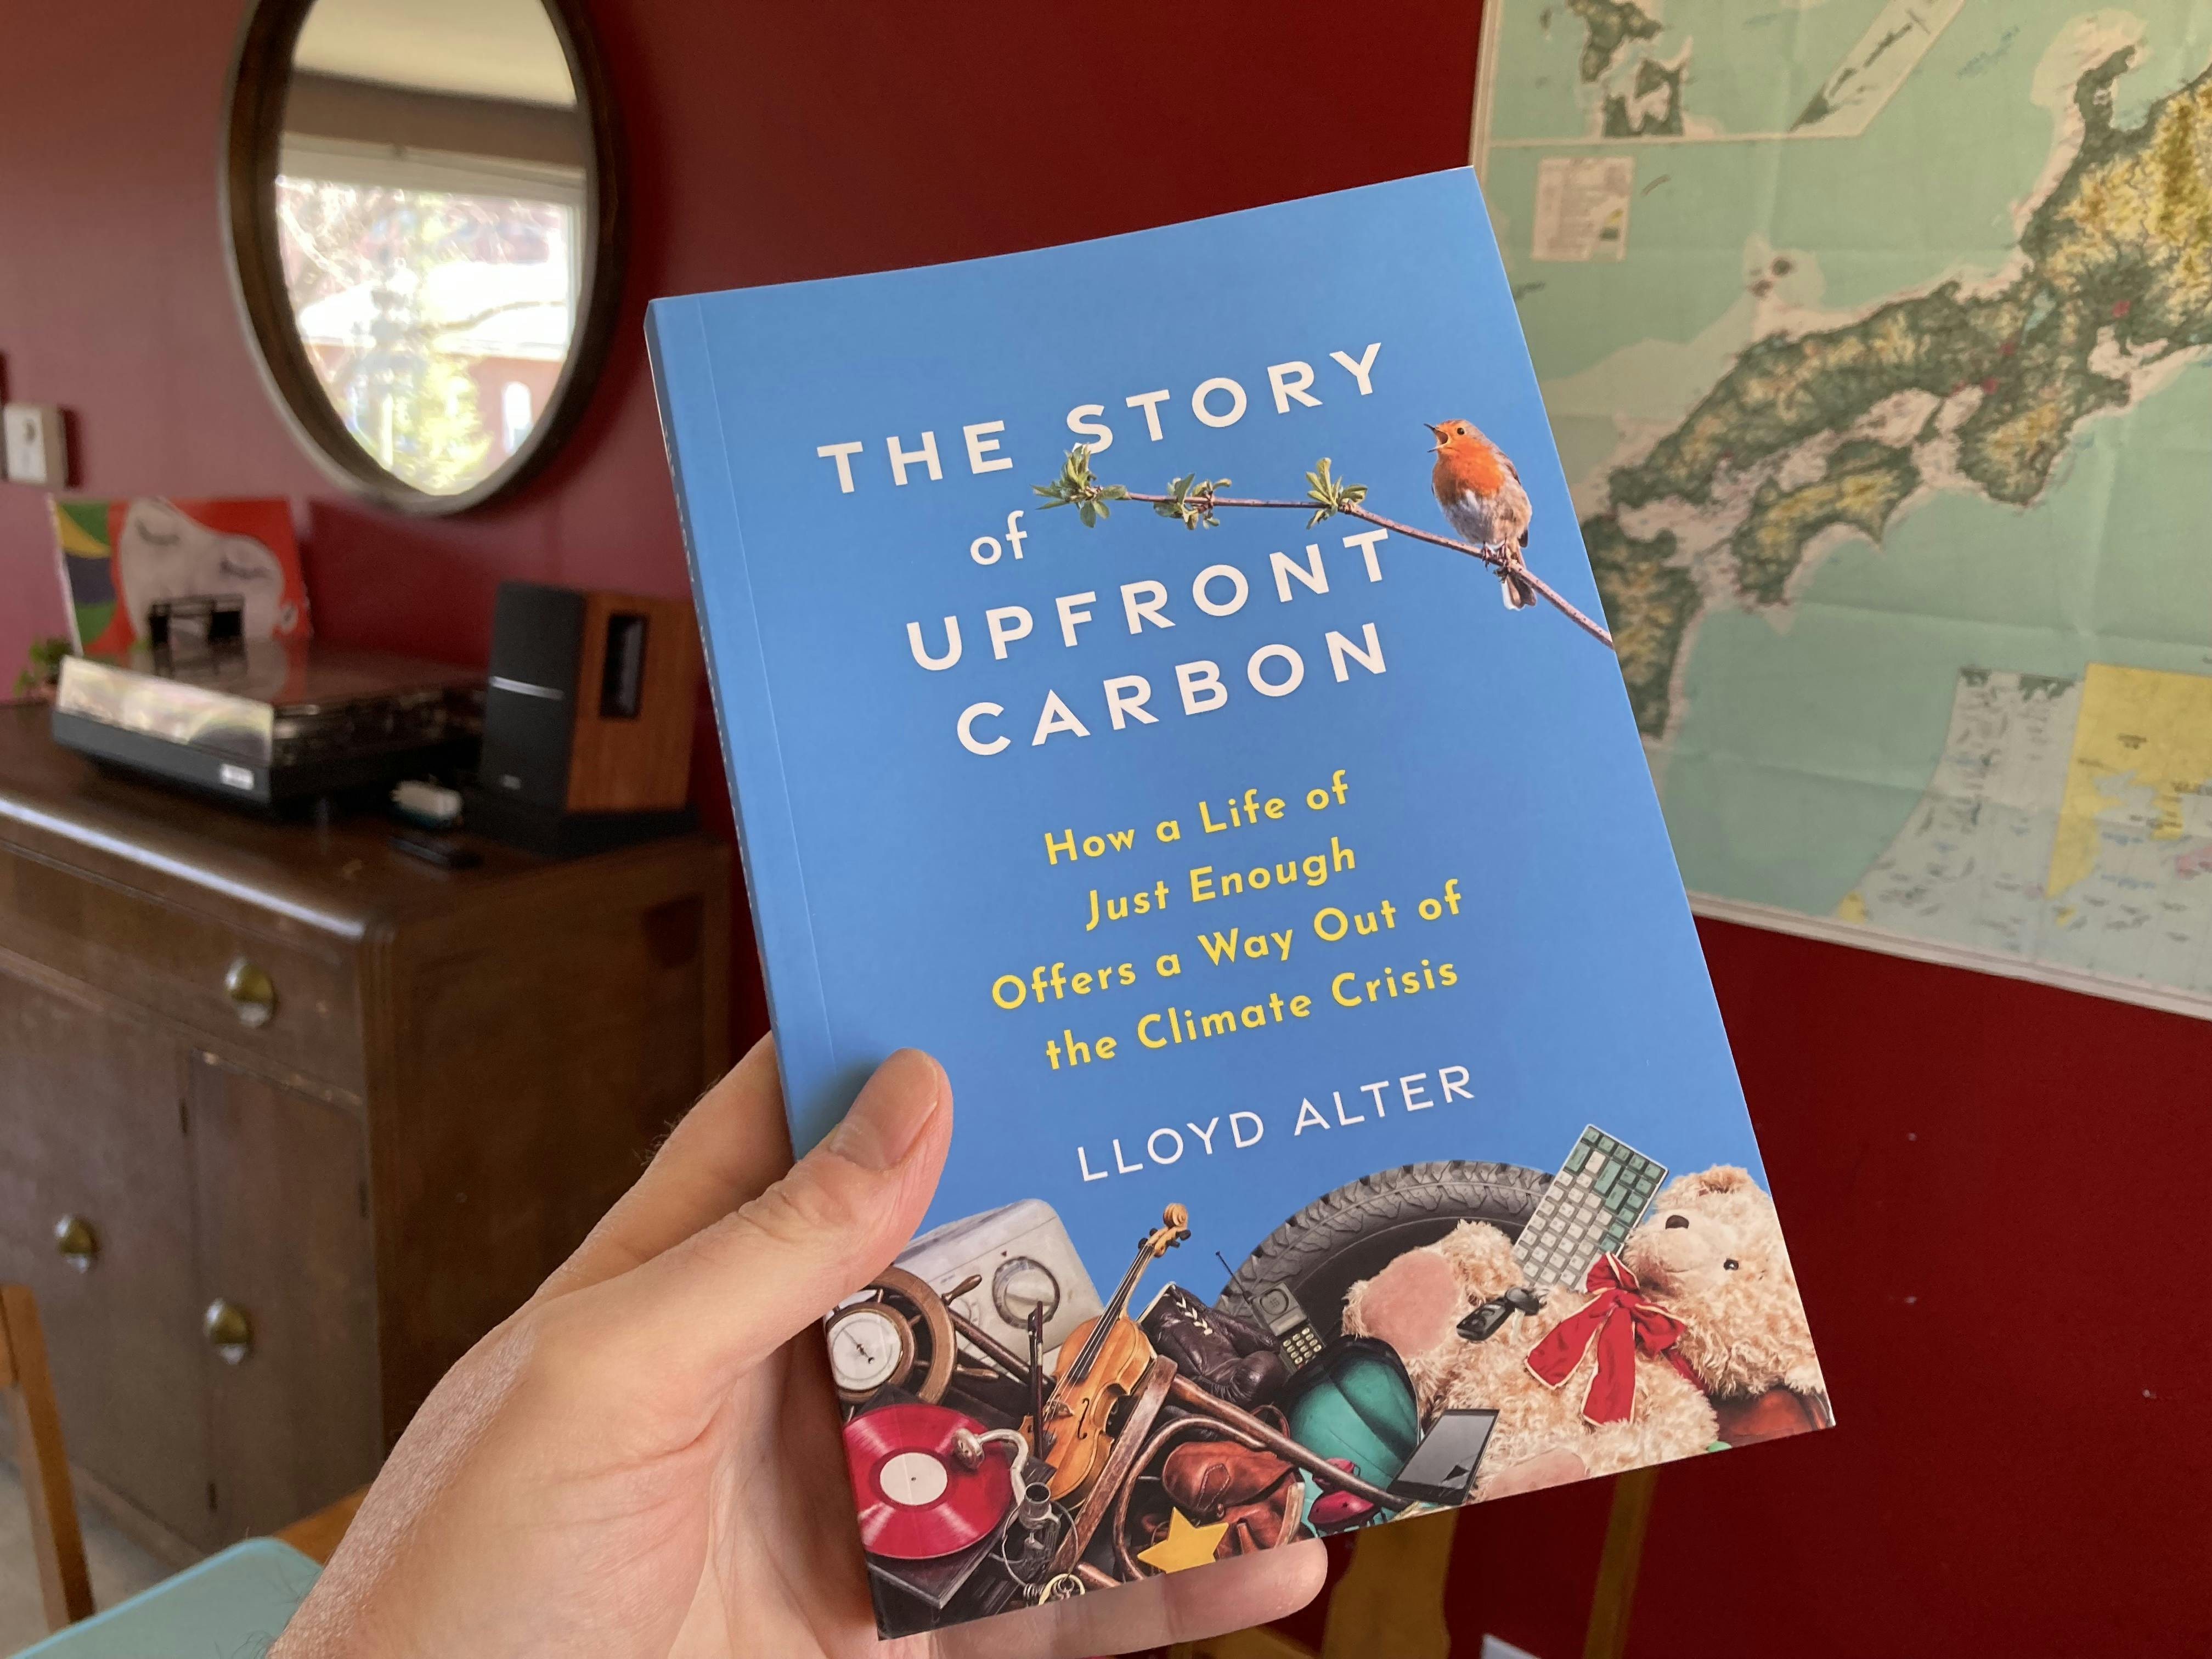 A photo of Lloyd Alter's new book, The Story of Upfront Carbon, being held by my hand, with a record player and a map of Japan in the background.